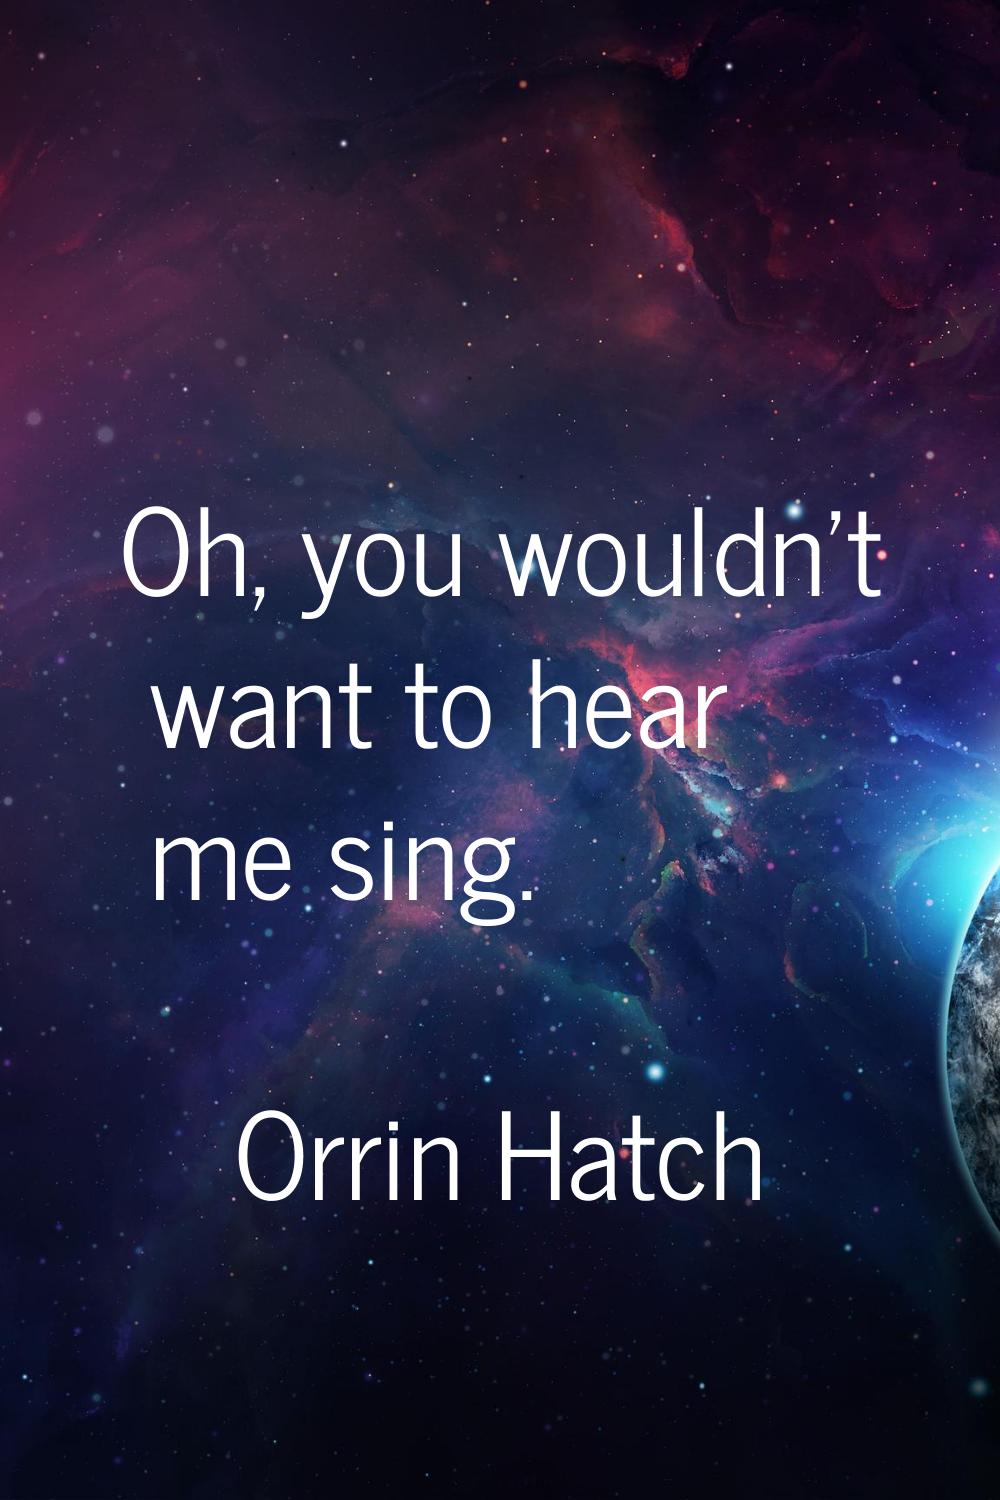 Oh, you wouldn't want to hear me sing.